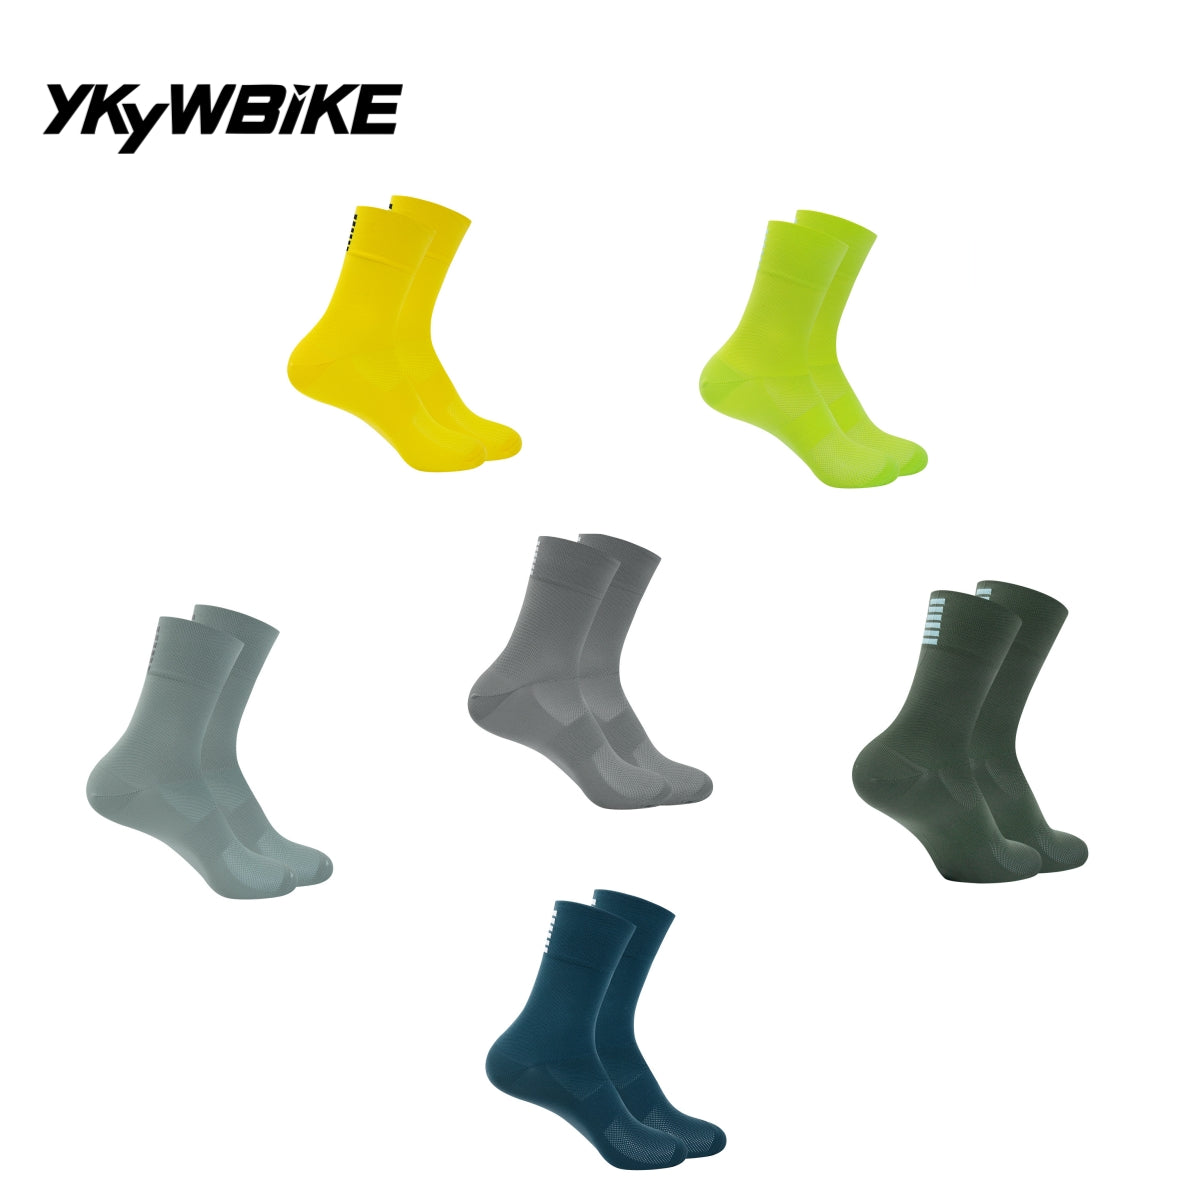 YKYW Cycling Running Professional Sport Height Socks Six Bars Pattern Design Wicking Antibacterial Durable 5 Colors